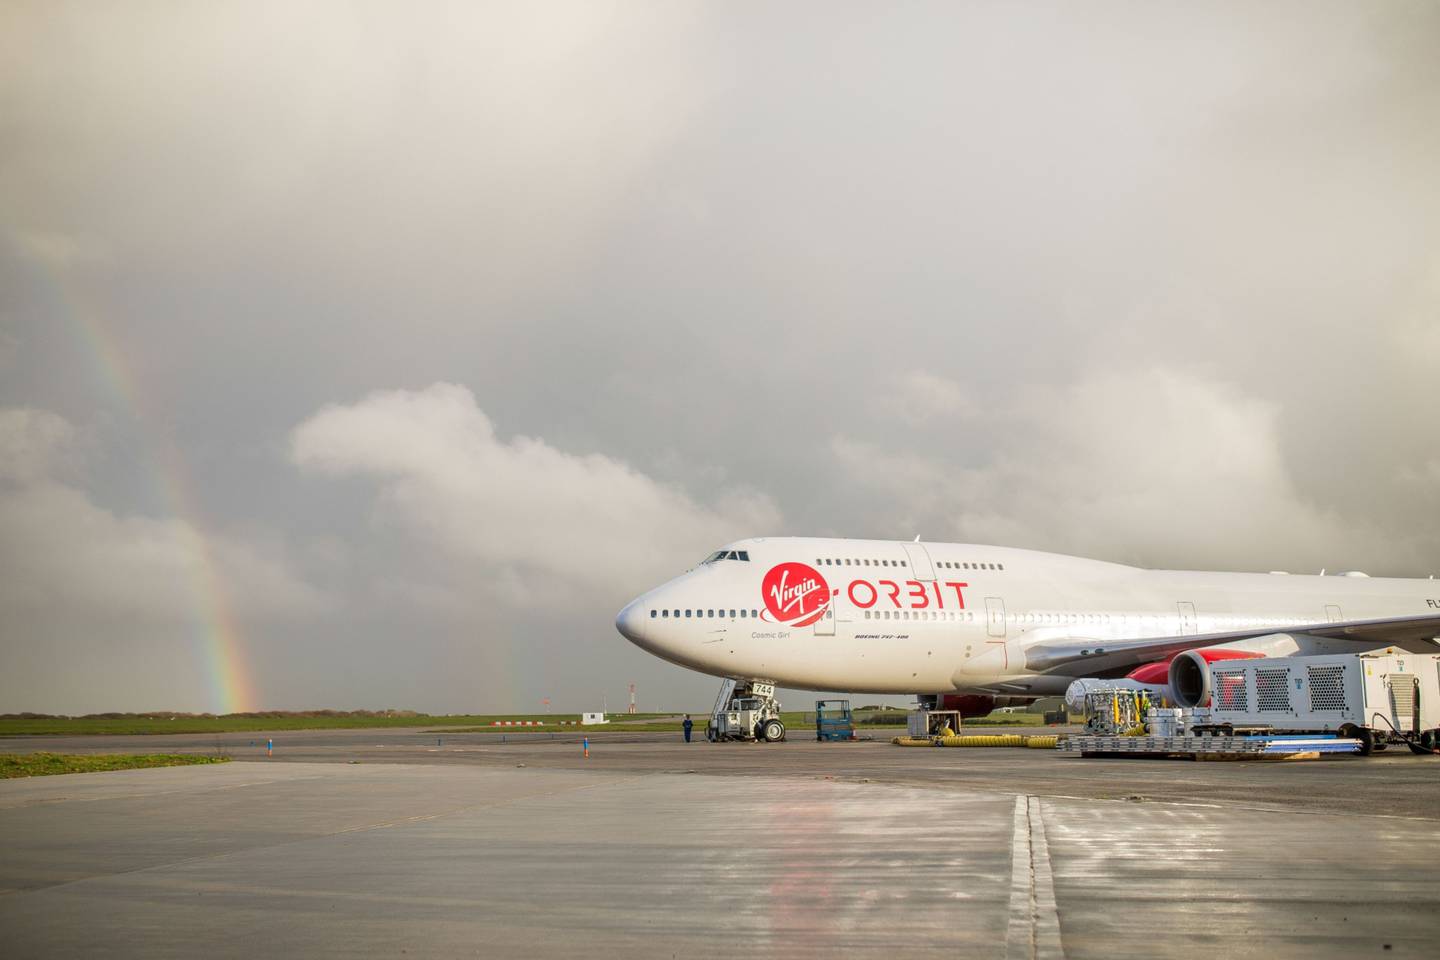 The 'Cosmic Girl' Boeing Co.  747 launch aircraft, operated by Virgin Orbit Holdings on the tarmac at Spaceport Cornwall, located at Cornwall Airport Newquay.  Bloomberg